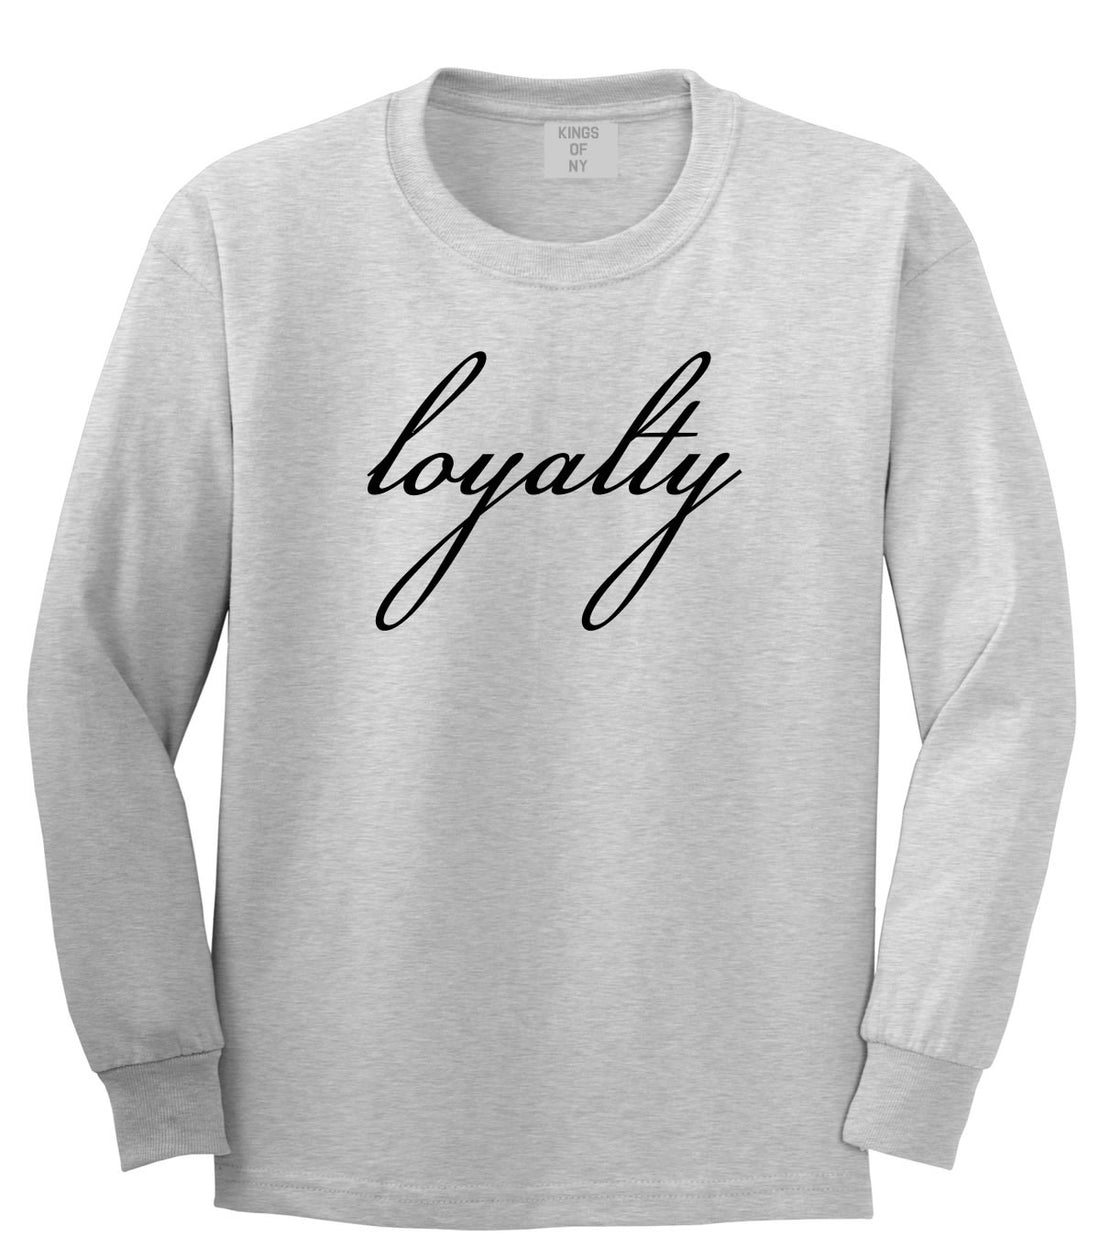 Loyalty Respect Aint New York Hoes Long Sleeve Boys Kids T-Shirt In Grey by Kings Of NY